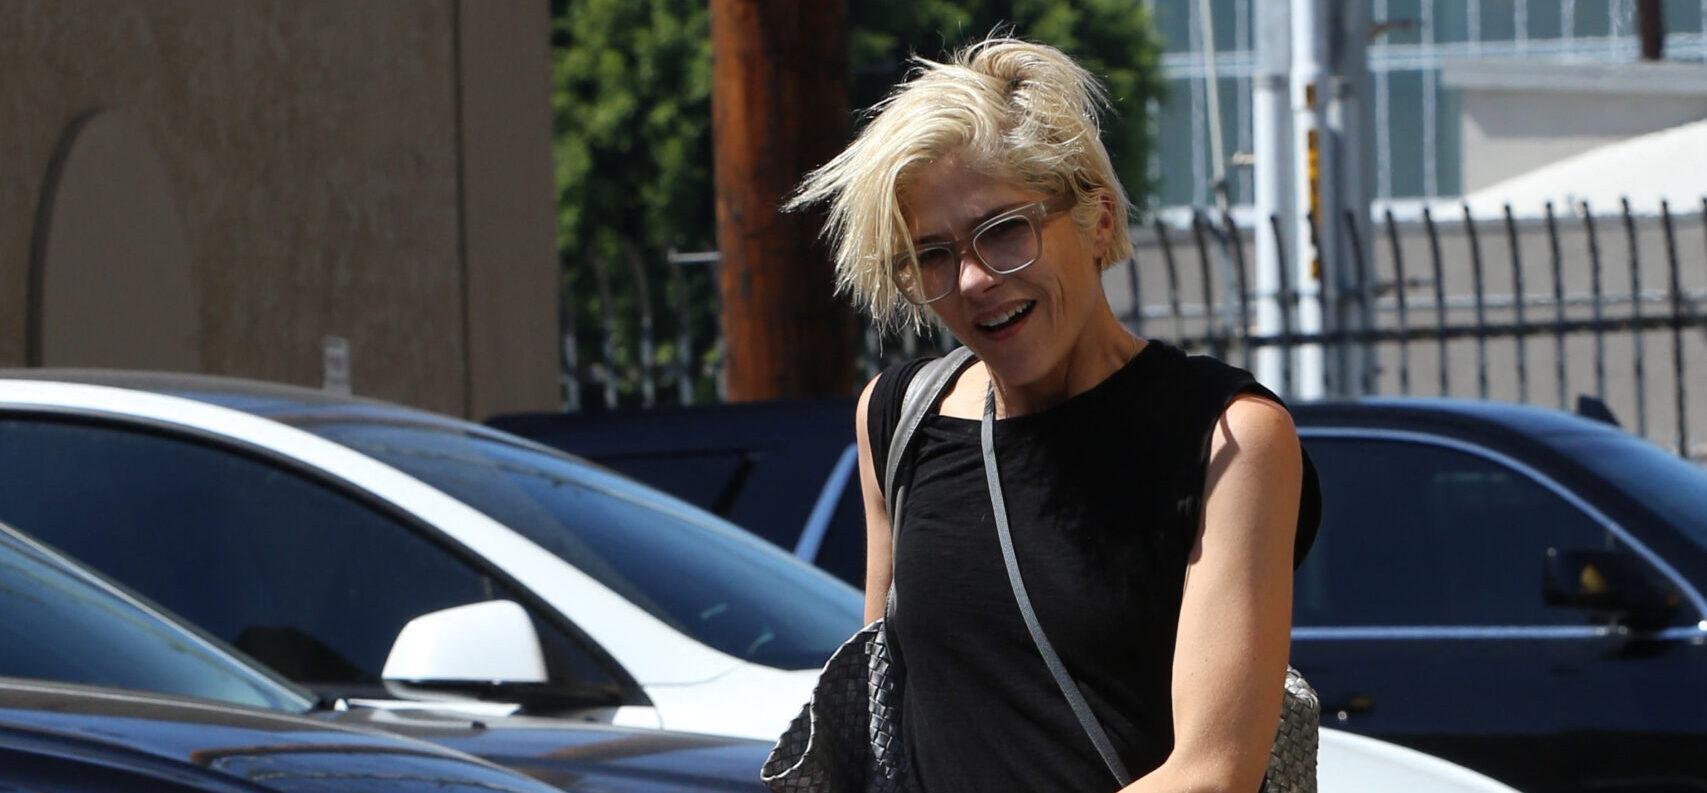 Selma Blair walks her dog before heading out in a limo for a trip